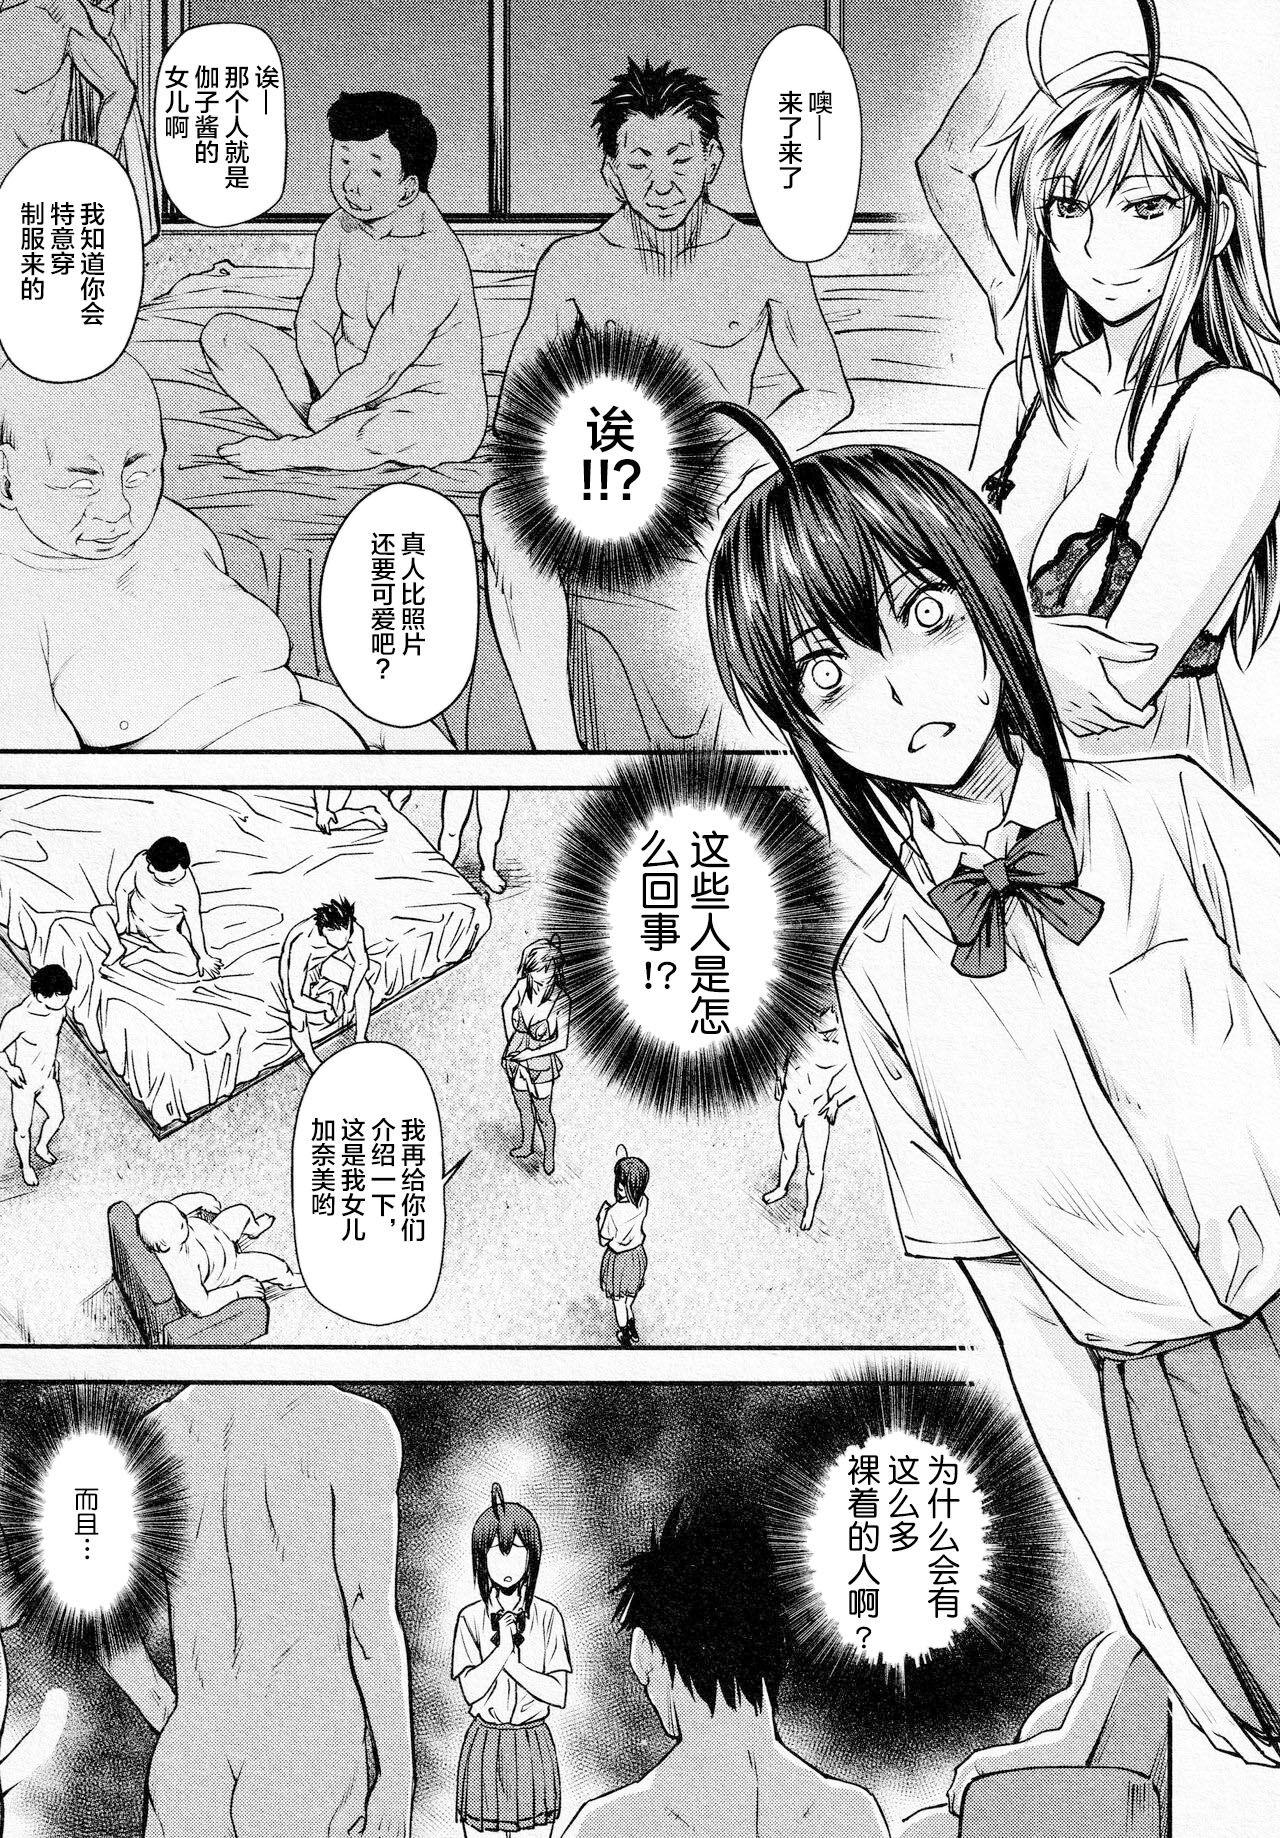 Whipping Kaname Date #14 Gay Boyporn - Page 6